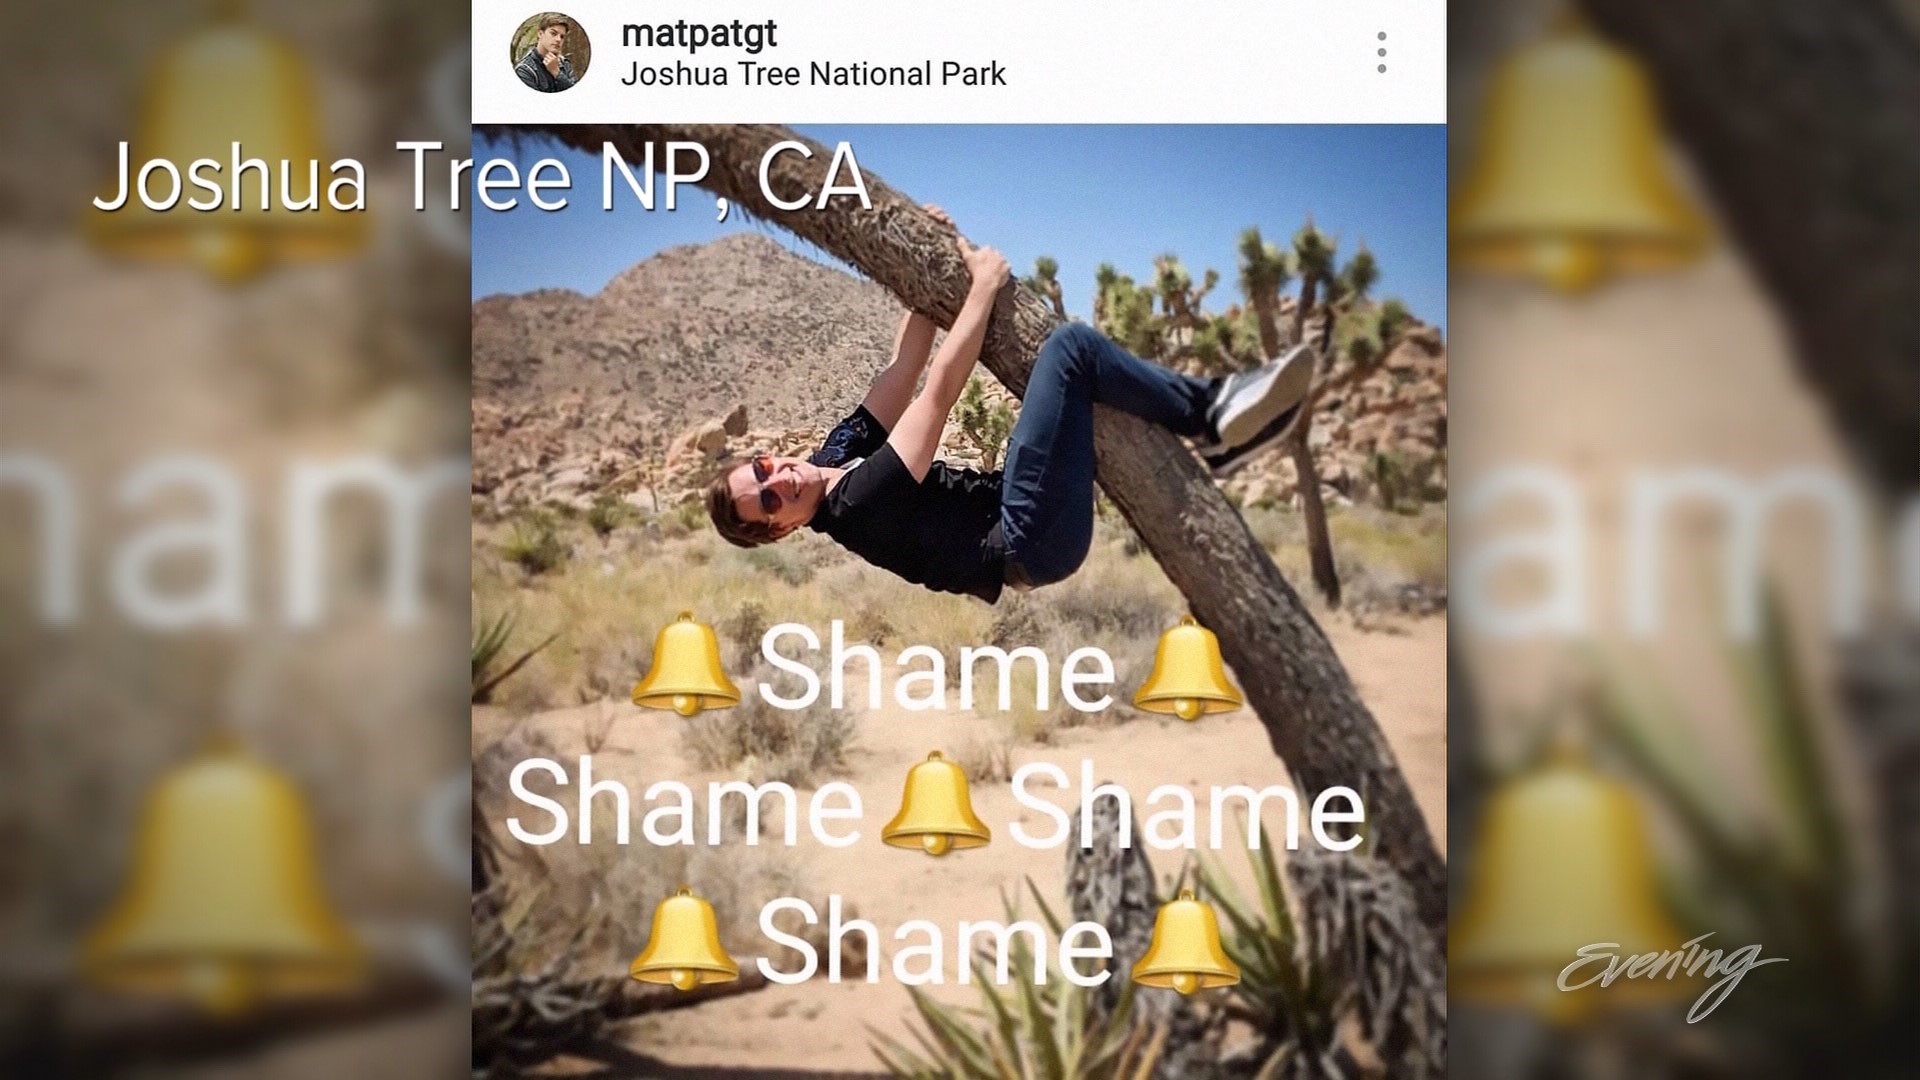 Is social media ruining public land? Public Lands Hate You thinks so.